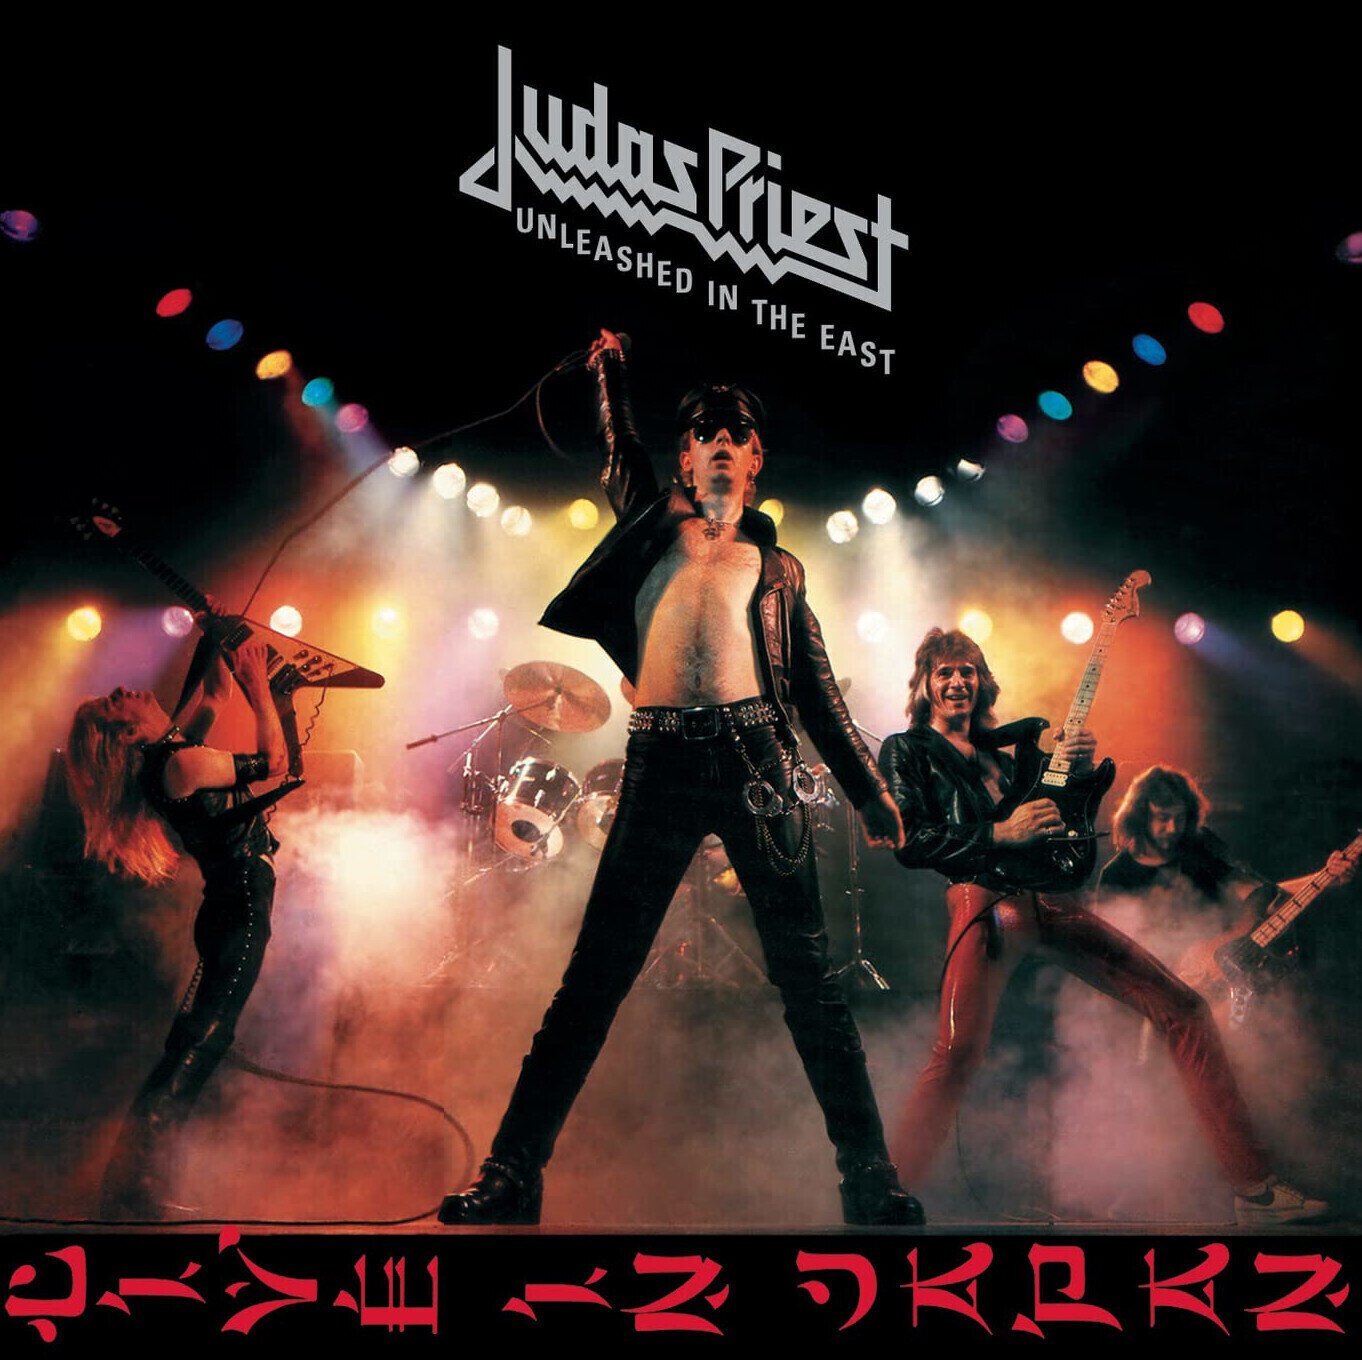 Musiikki-CD Judas Priest - Unleashed In The East (Live In Japan) (Remastered) (CD)